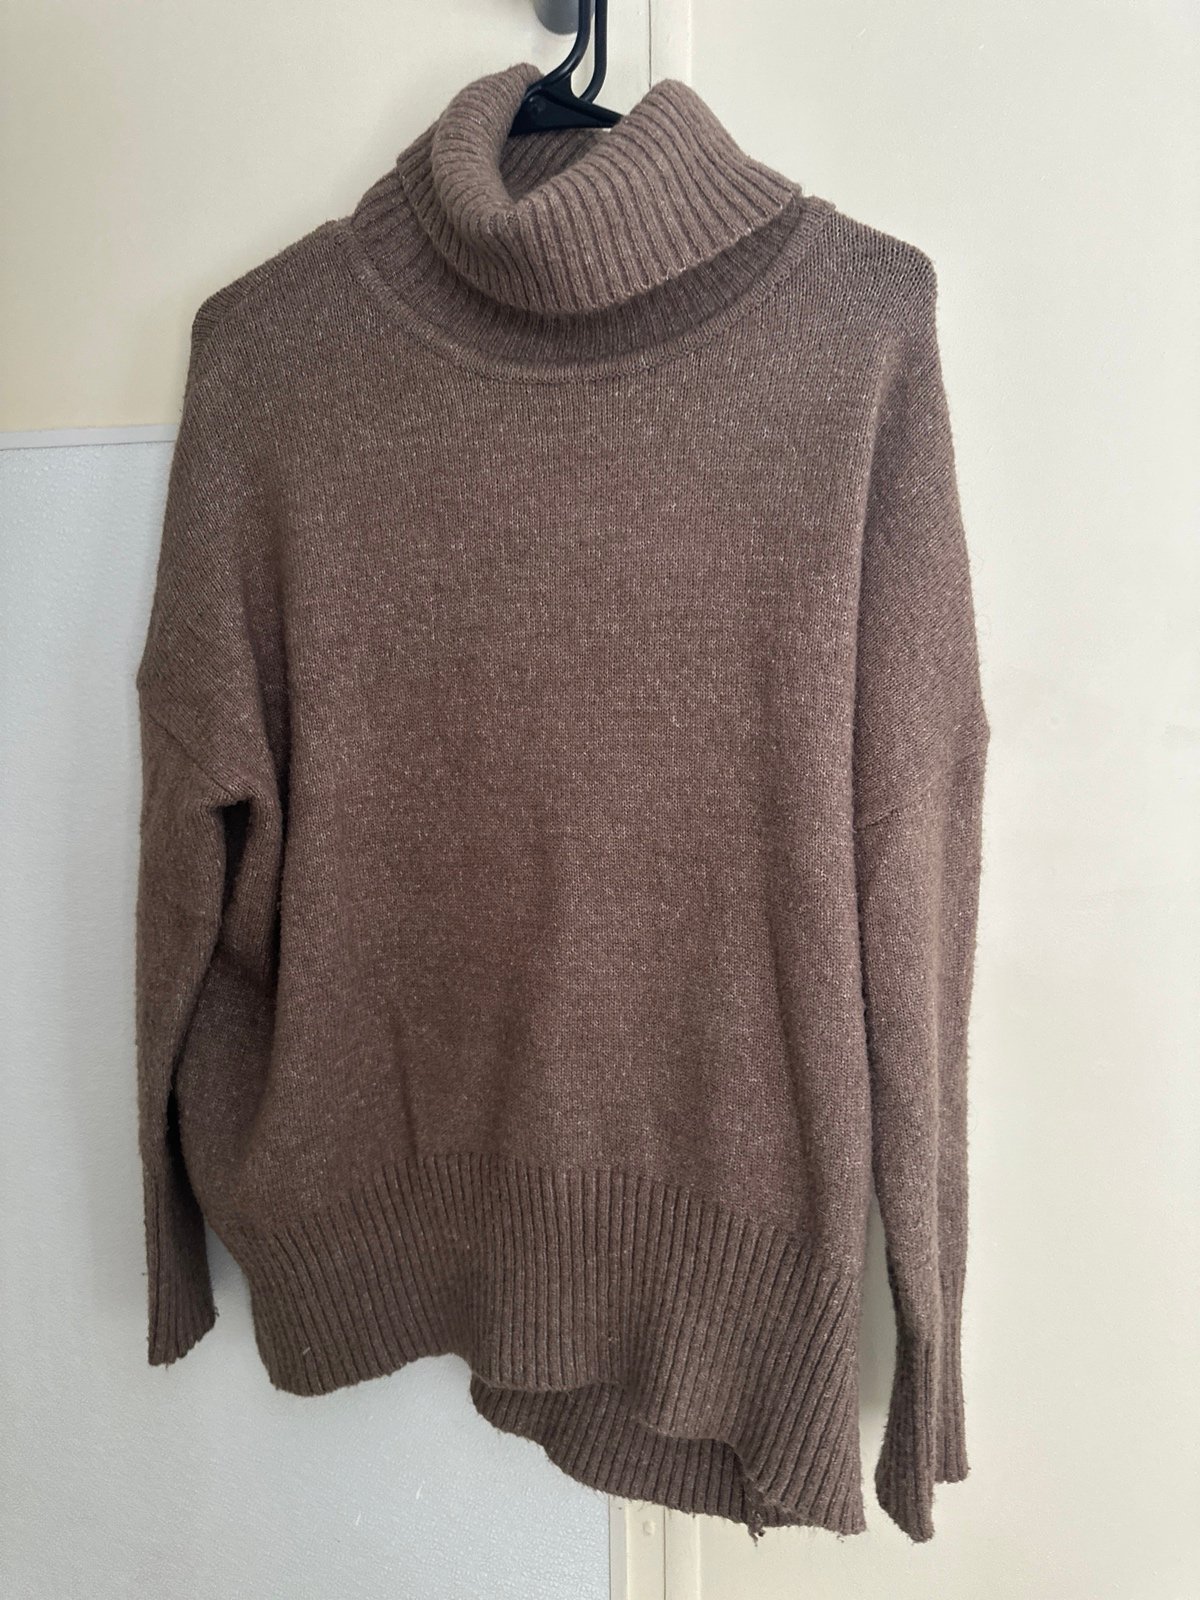 High quality Women’s sweater size small lSK0Fm8I4 just for you